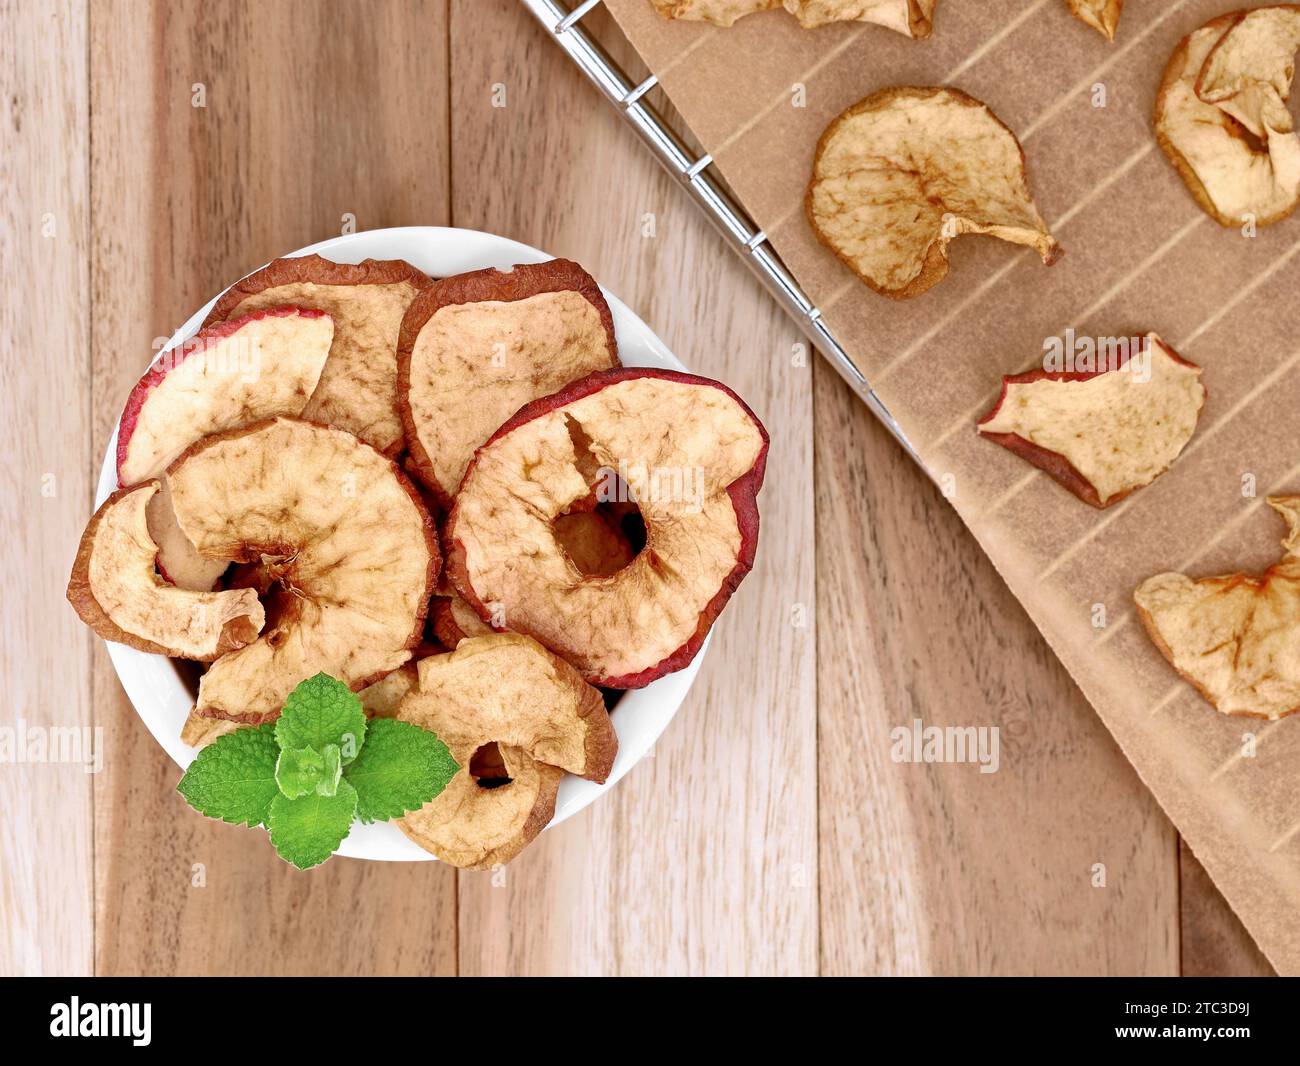 Dried apple rings in white bowl on a wooden table, homemade apple rings on a baking tray from the oven Stock Photo